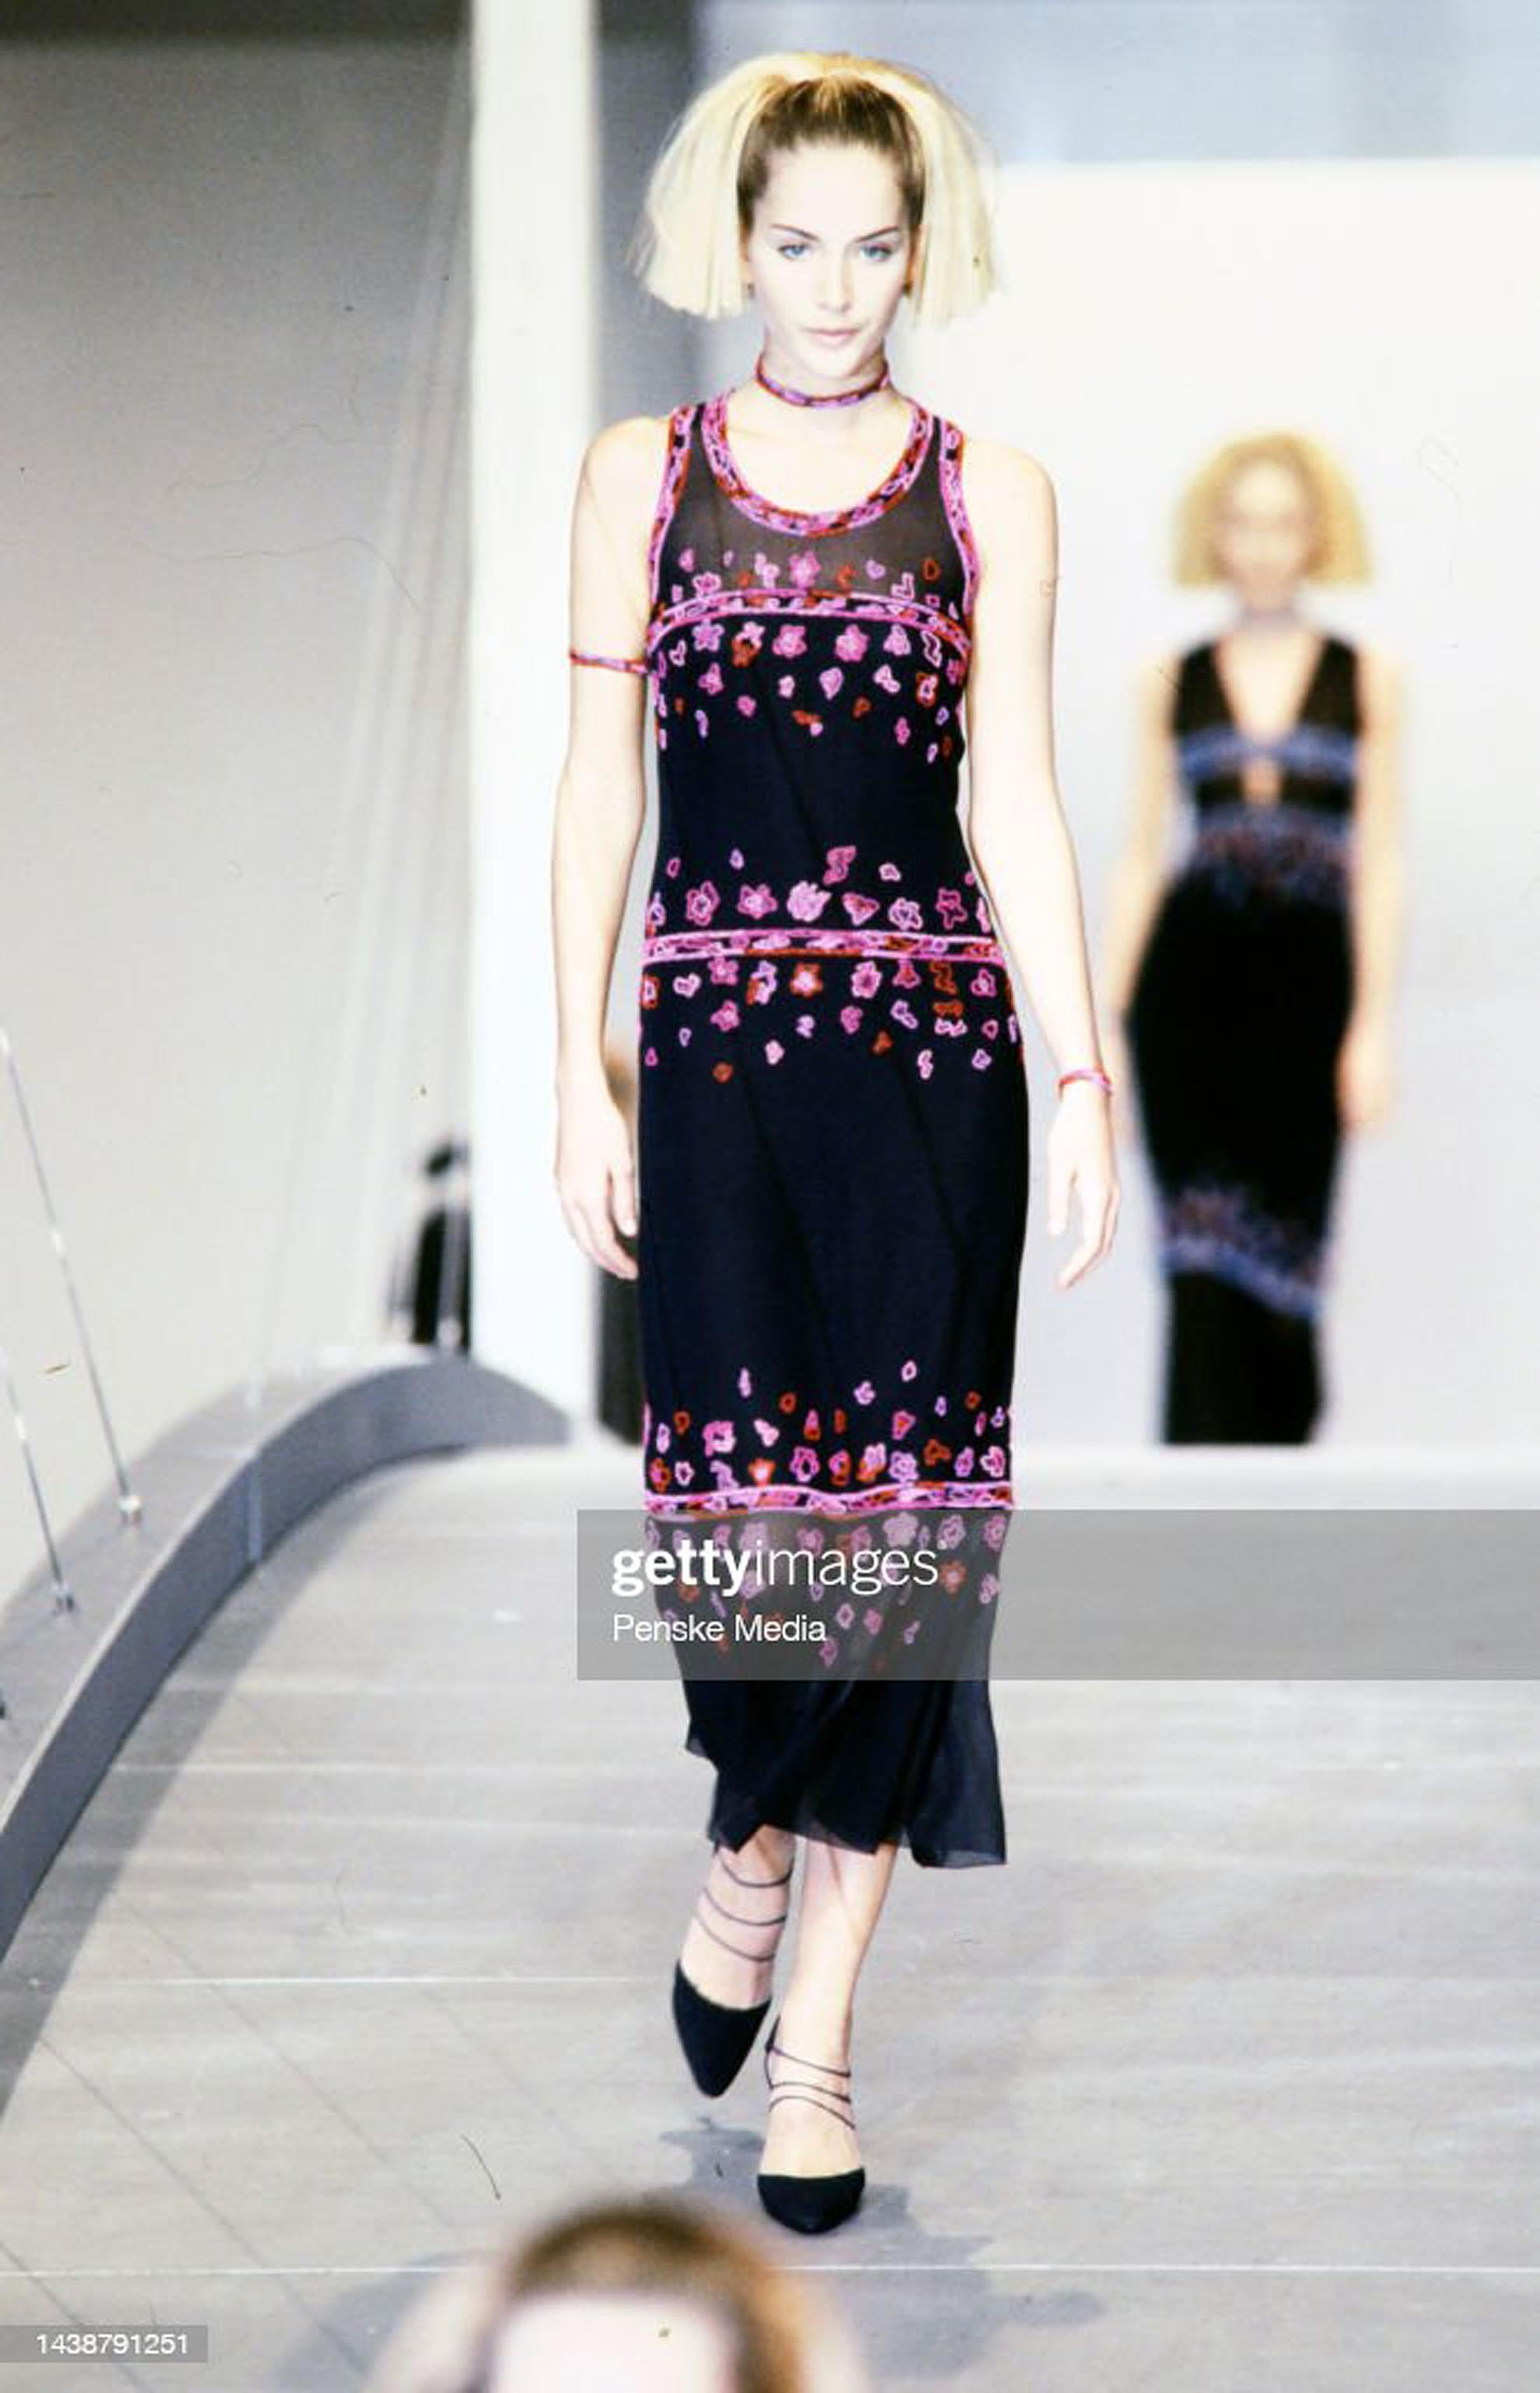 Chanel is known to be one of the most luxurious and decadent fashion houses in the world. This sensational dark midnight blue heavily beaded semi-sheer silk chiffon dress, dating back to Karl Lagerfeld's unforgettable 1997 fall-winter runway